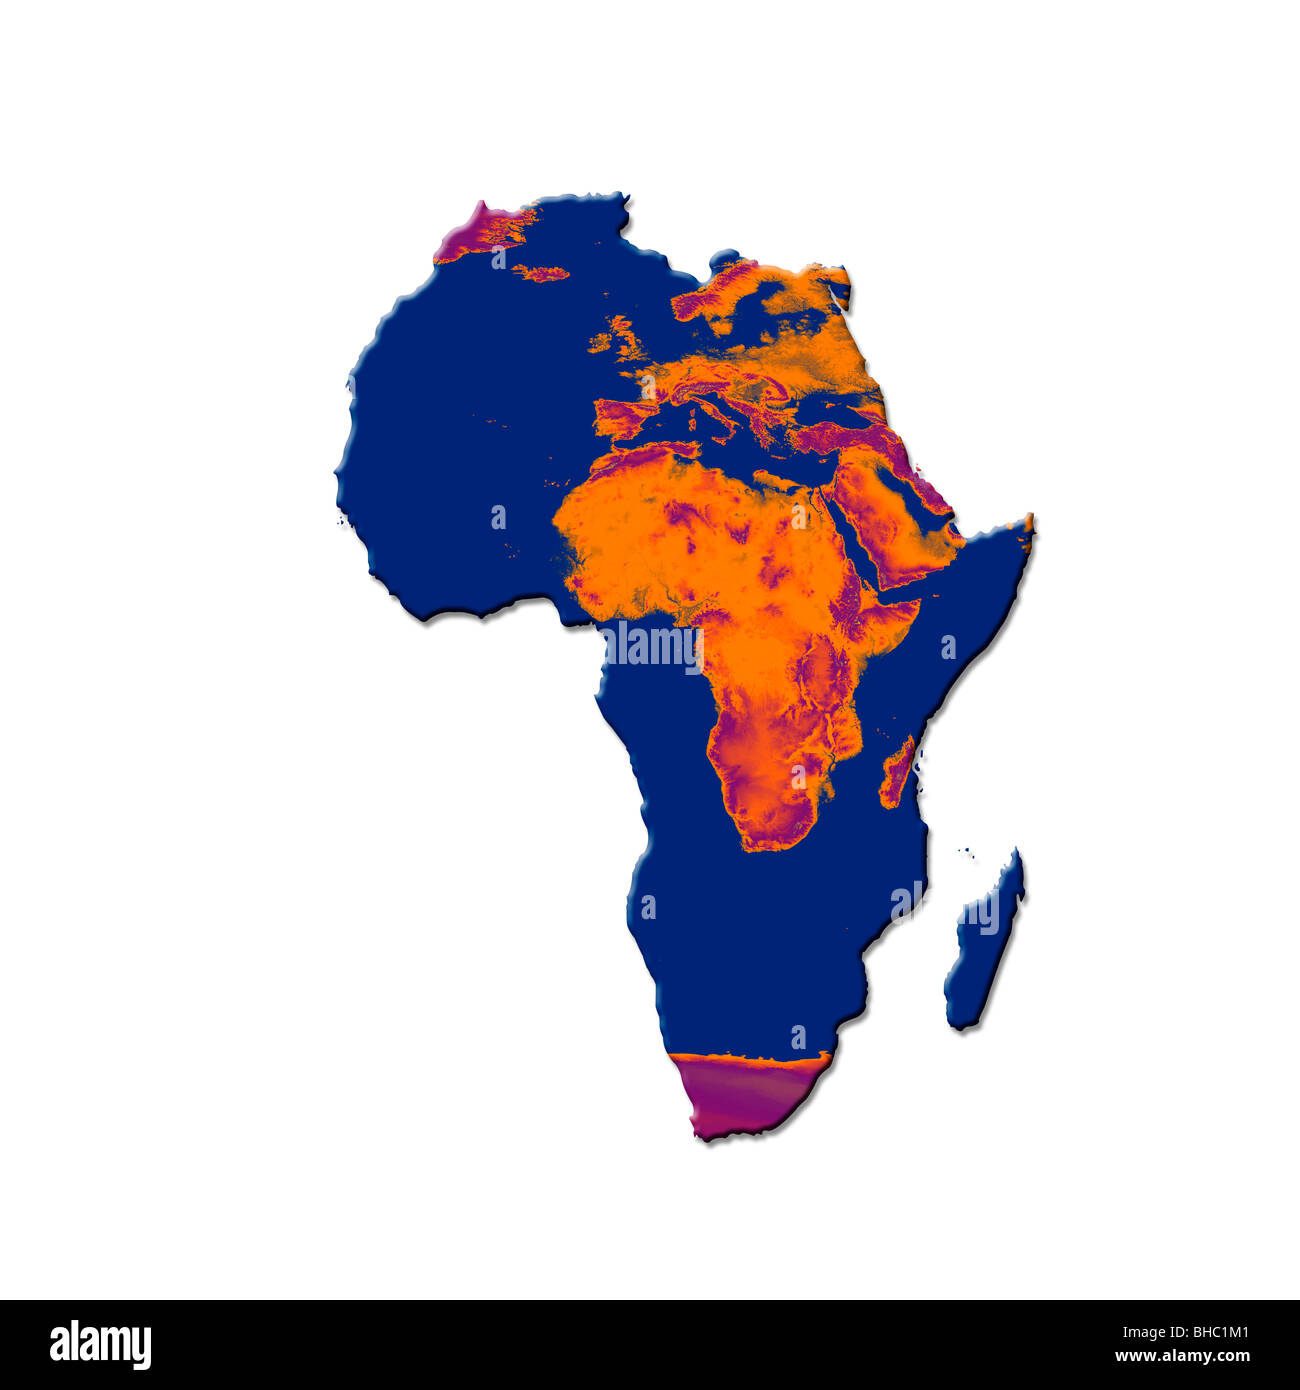 desertification in africa graph